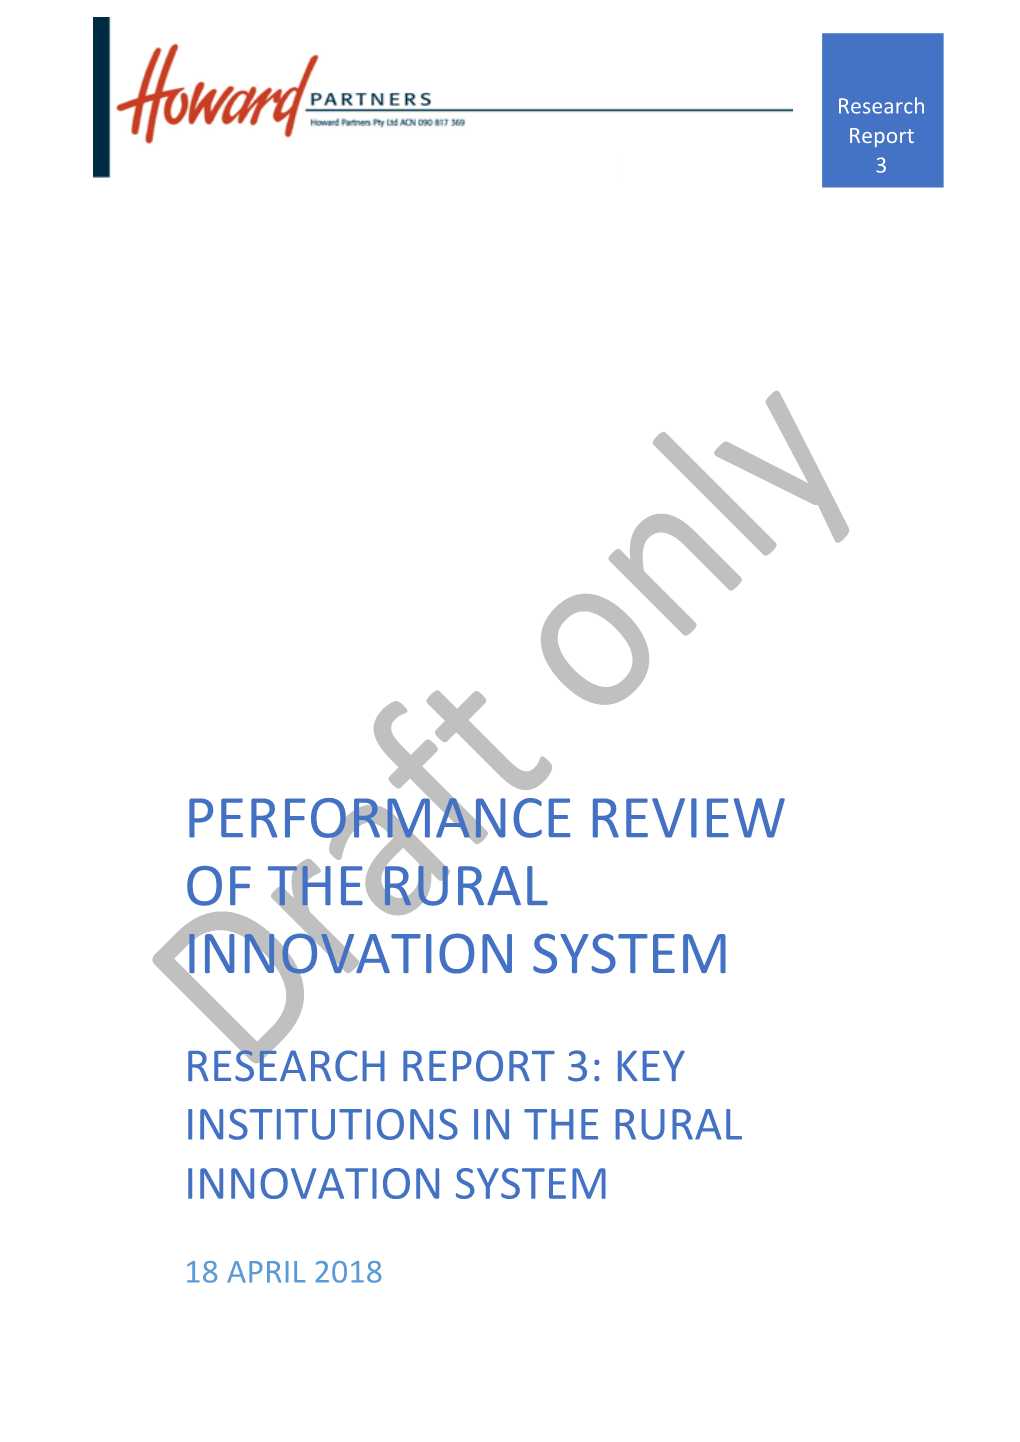 Performance Review of the Rural Innovation System